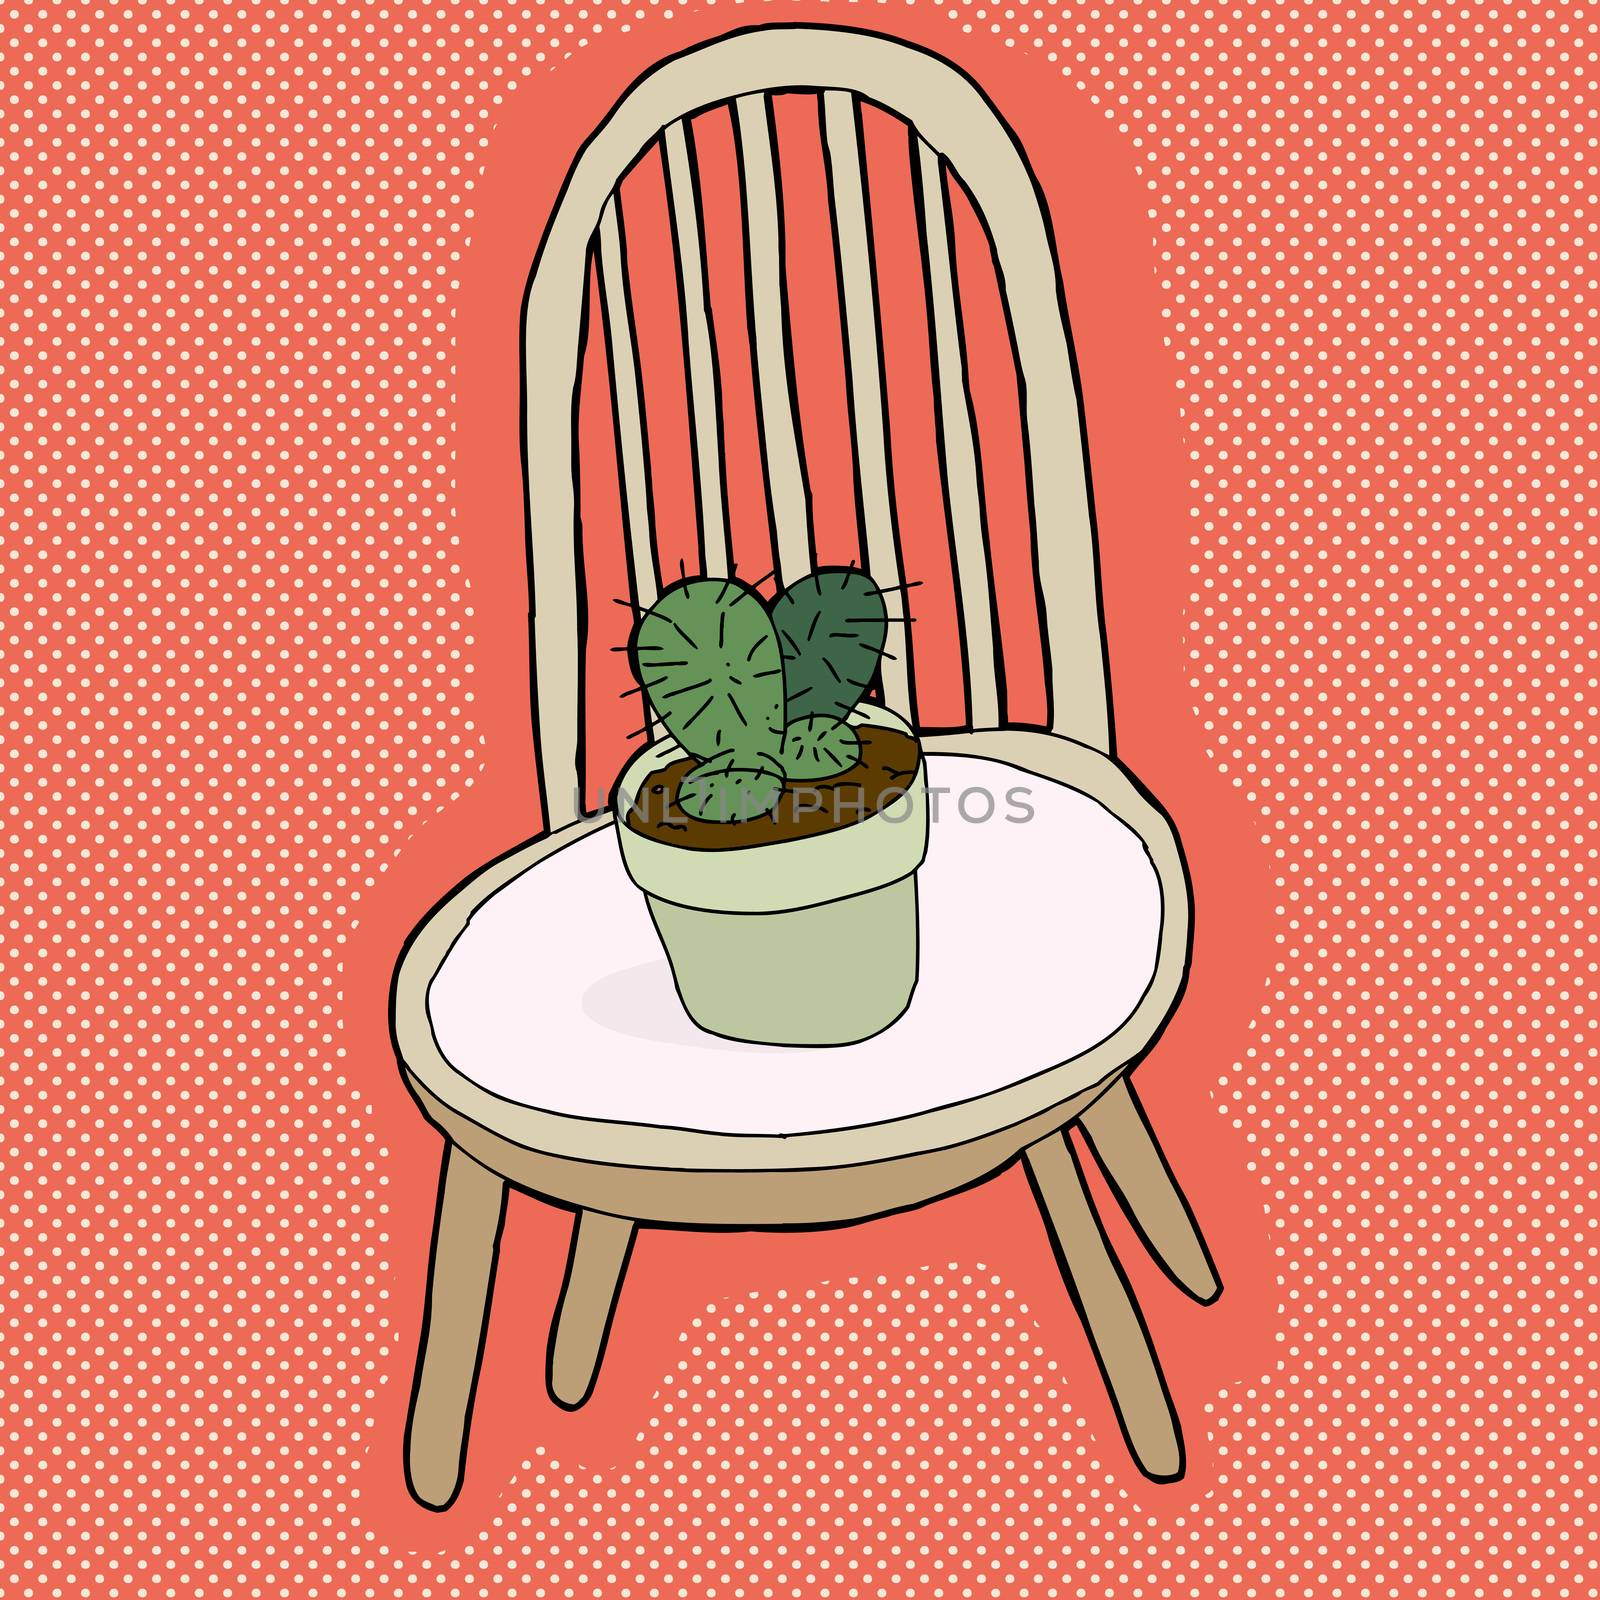 Pot of cactus plant on seat of chair